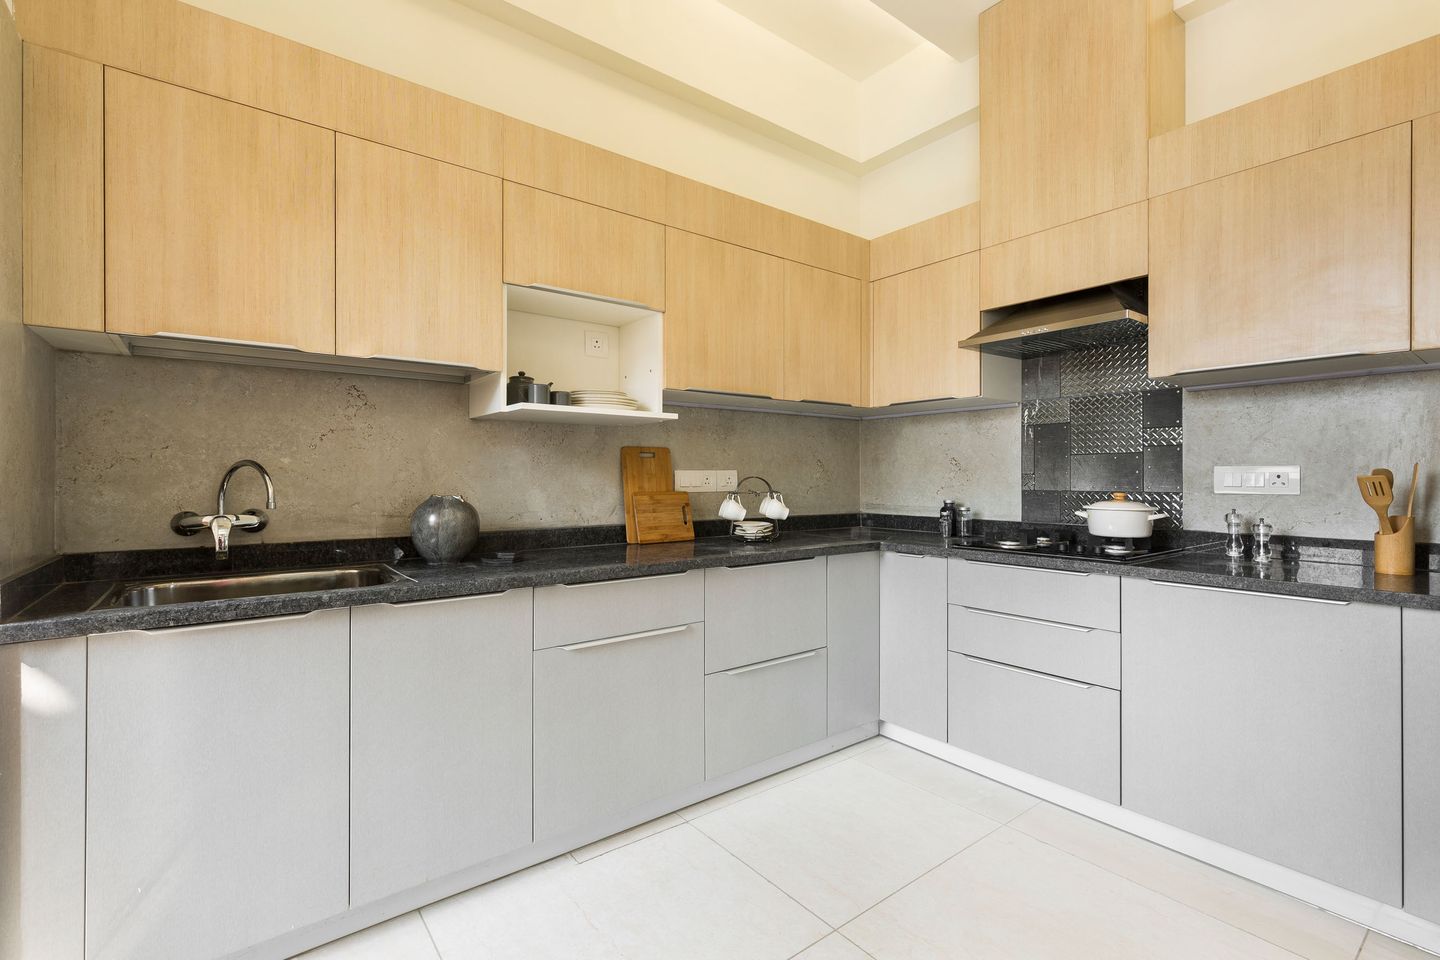 3-BHK Flat In Noida With Grey And Wood L Shaped Modular Kitchen - Livspace